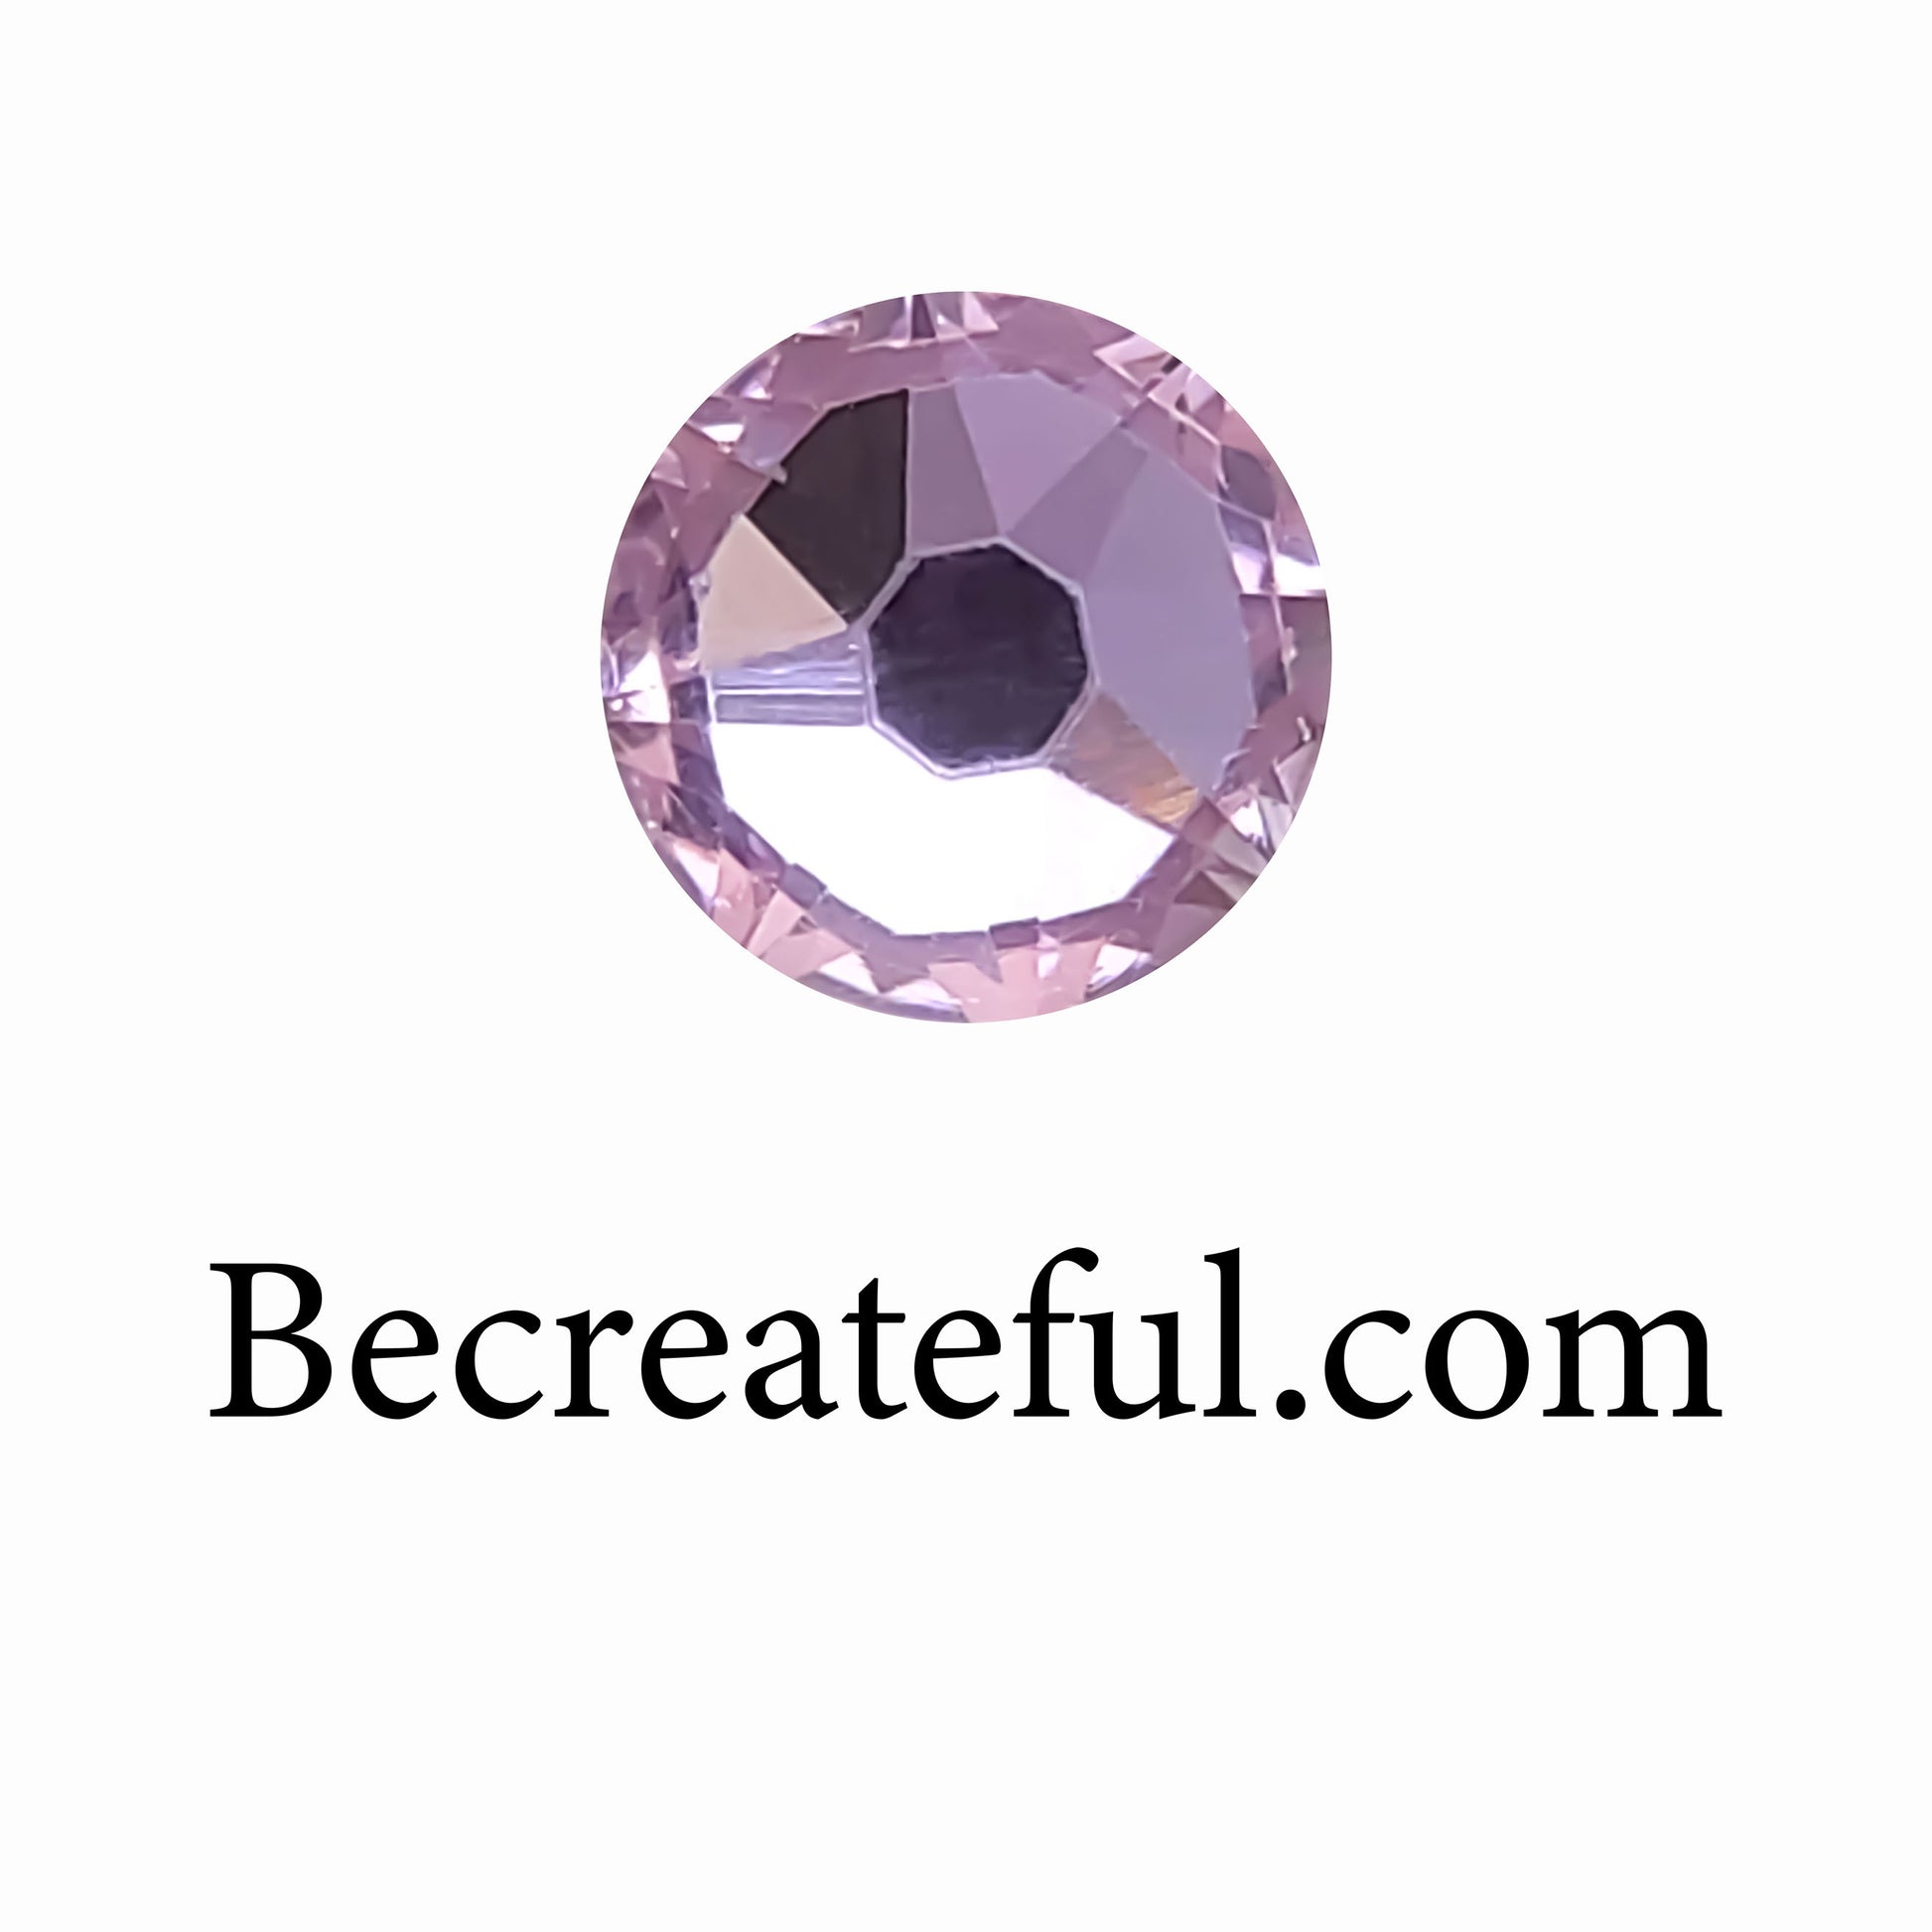 Be Createful LUXE® Pink Hotfix Rhinestones are high-quality 14-16 facet glass Rhinestone that provides intense sparkle and refraction. LUXE® Hotfix rhinestones are known for their brilliant sparkle, made possible with their precision-cut facets. LUXE® Rhinestones provide high-end sparkle without the high-end prices. 